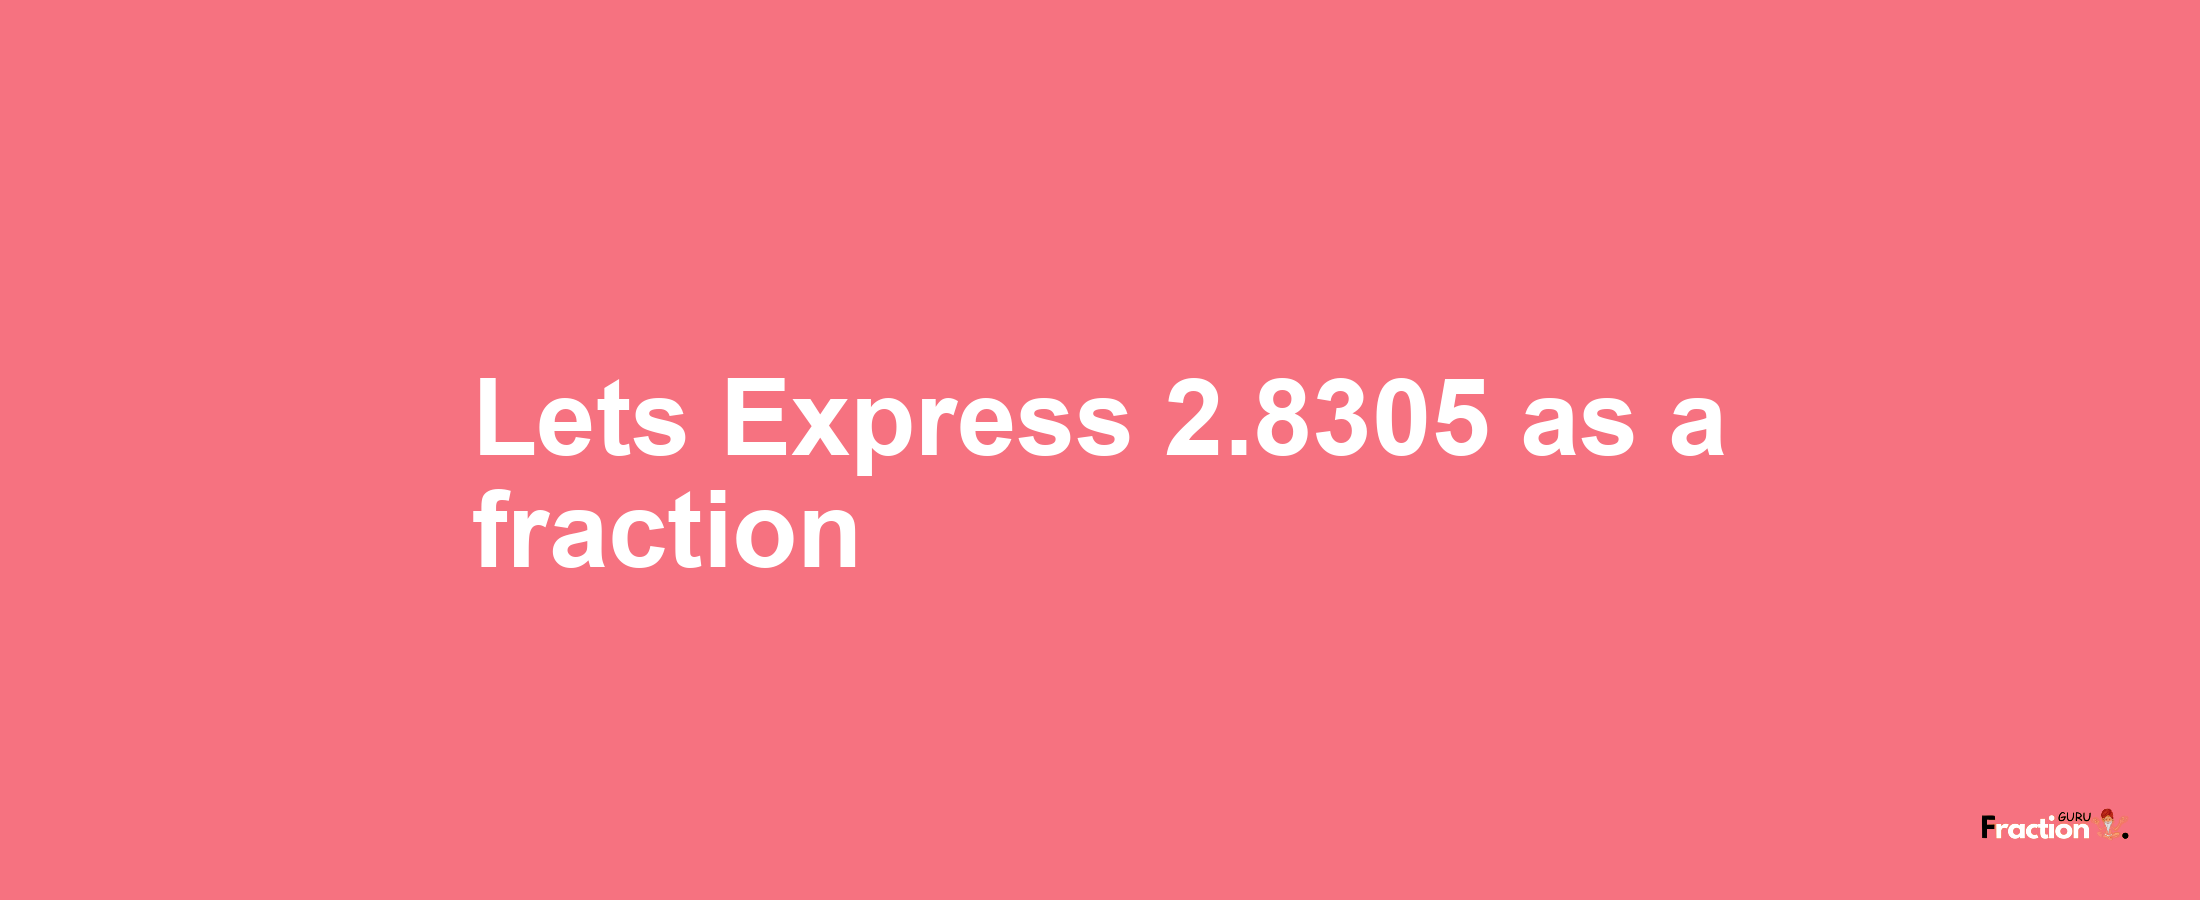 Lets Express 2.8305 as afraction